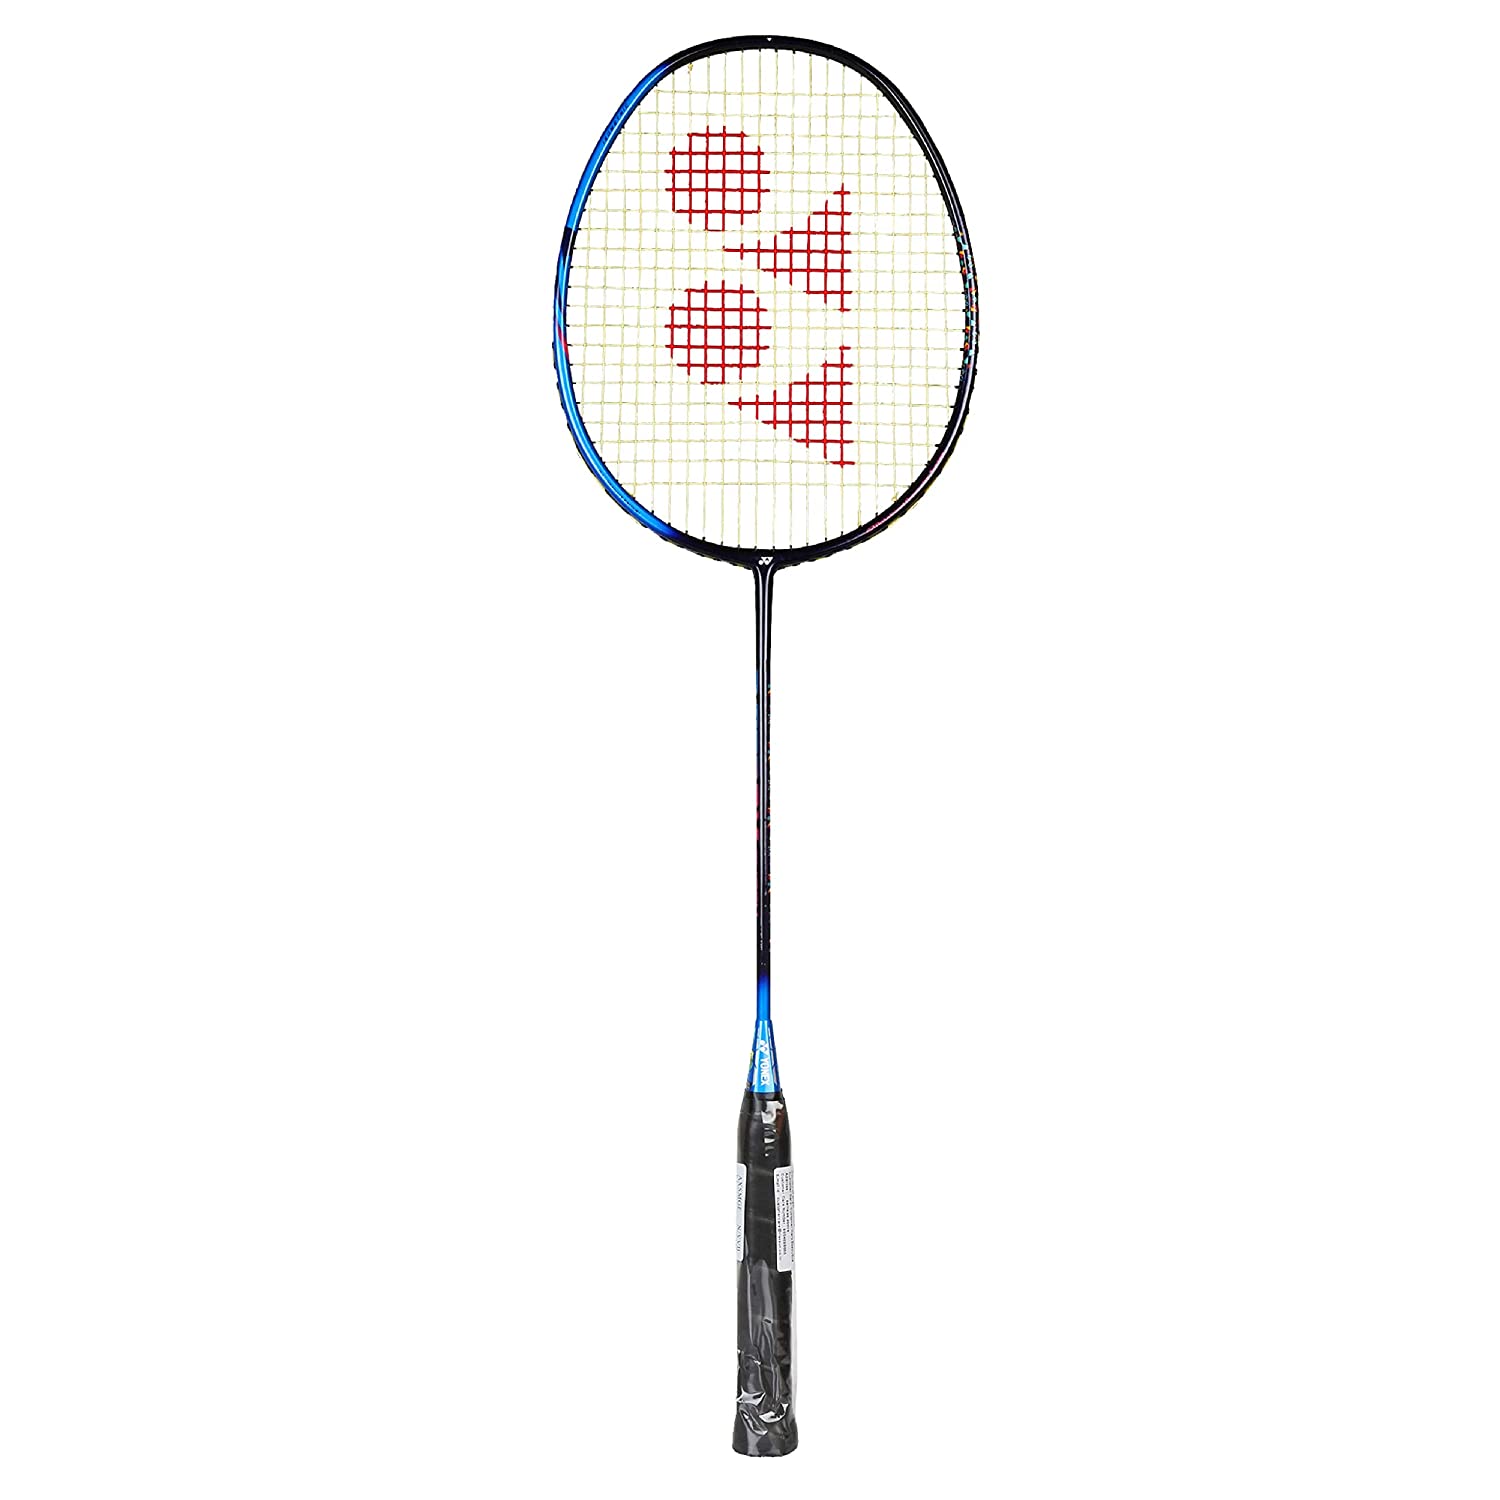 YONEX Astrox Smash Graphite Badminton Racket with Full Cover, Rotational Generator System (Ultra Light